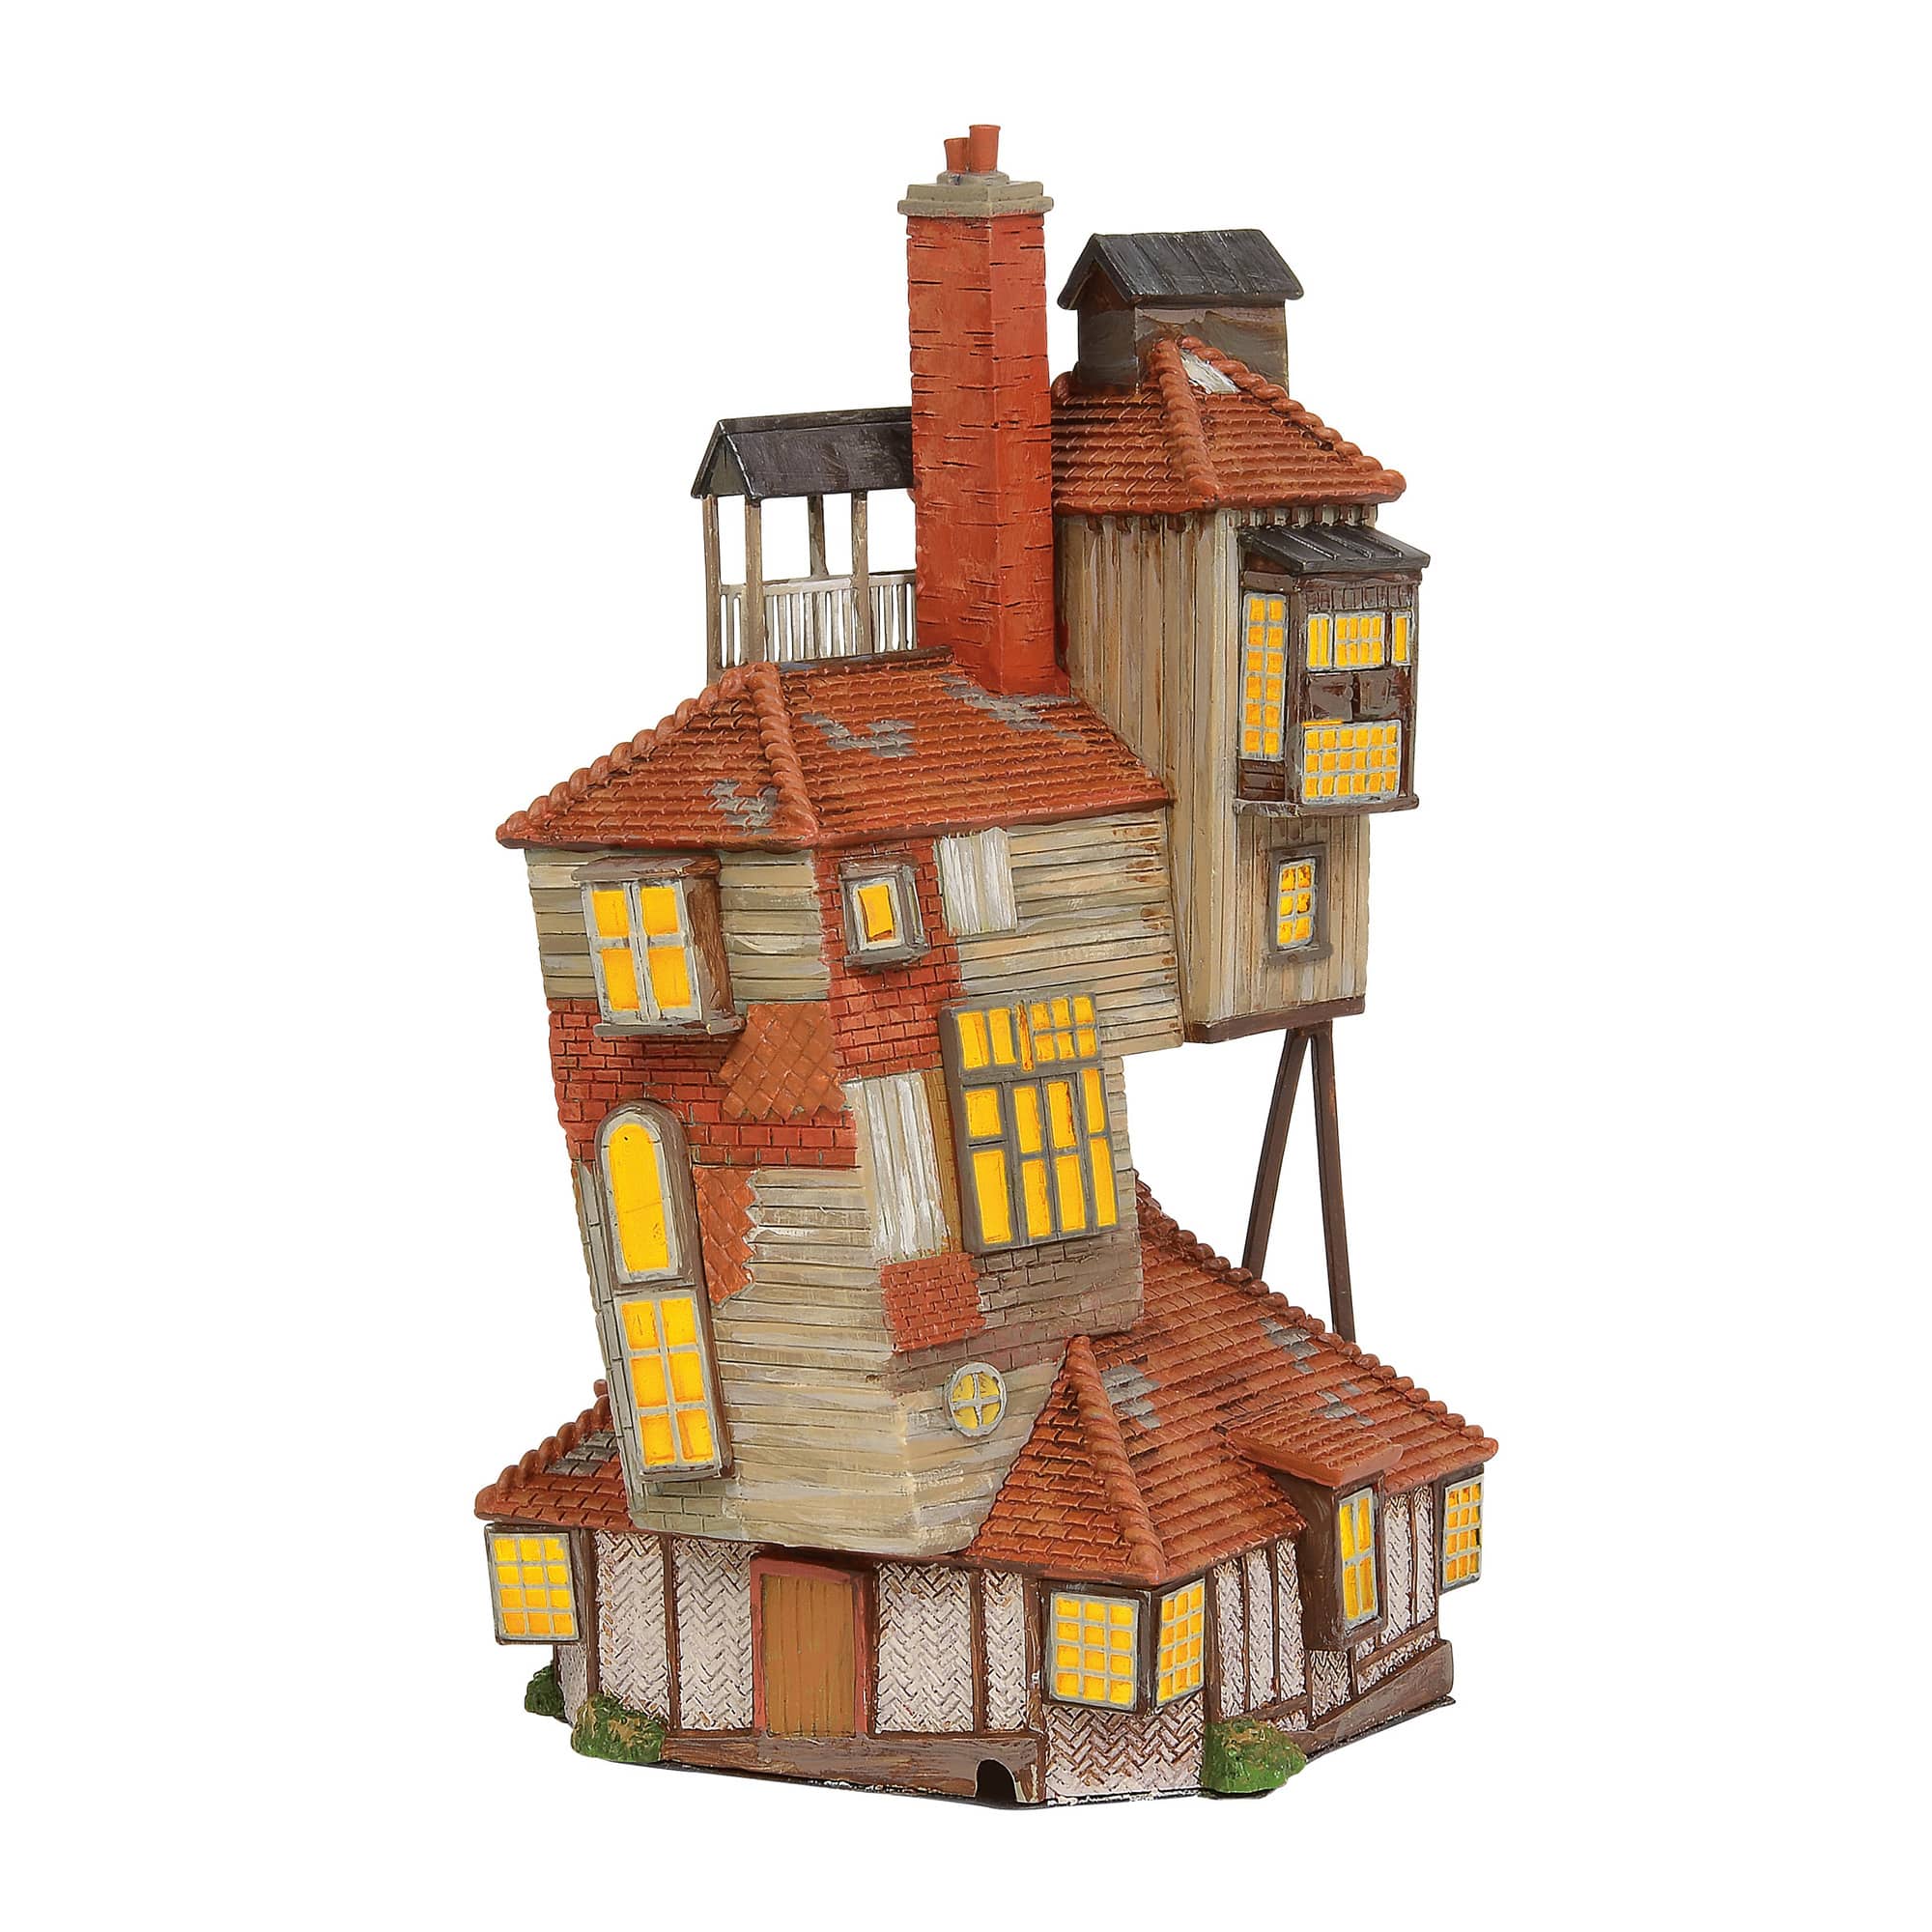 Harry Potter Village by Department 56